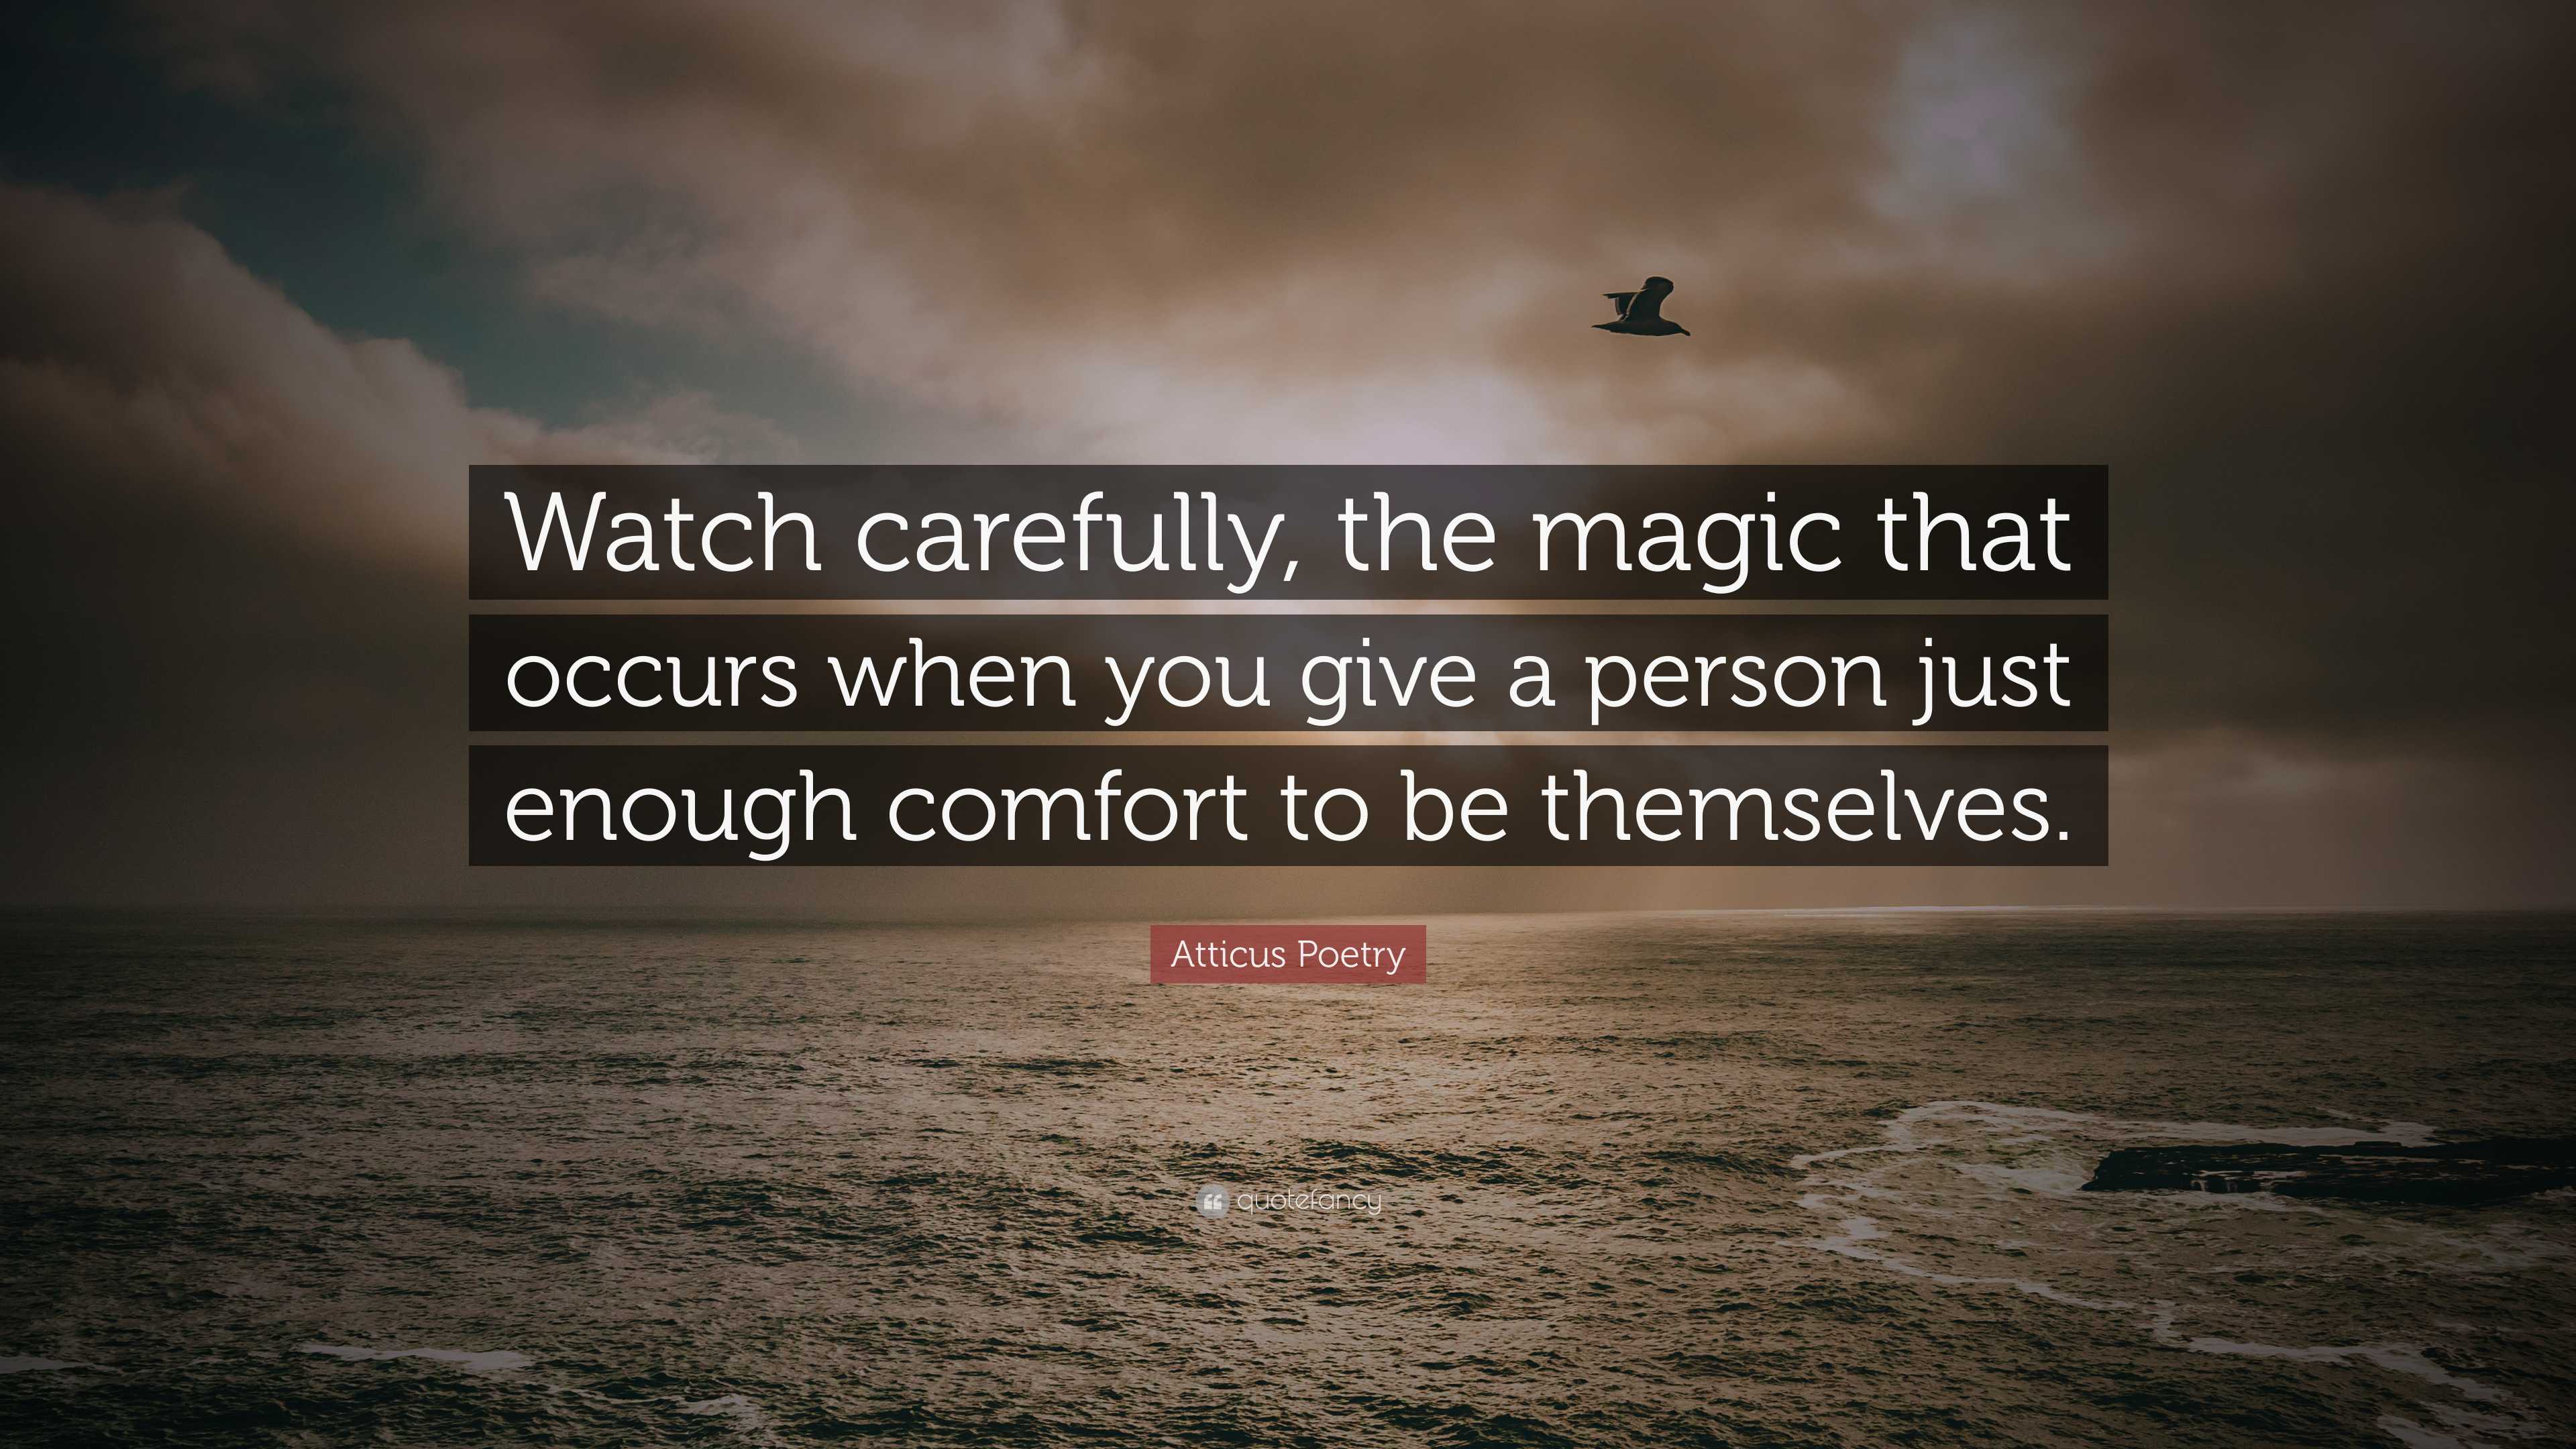 Watch carefully magic occurs | Quotes deep, Magical quotes, Wise words